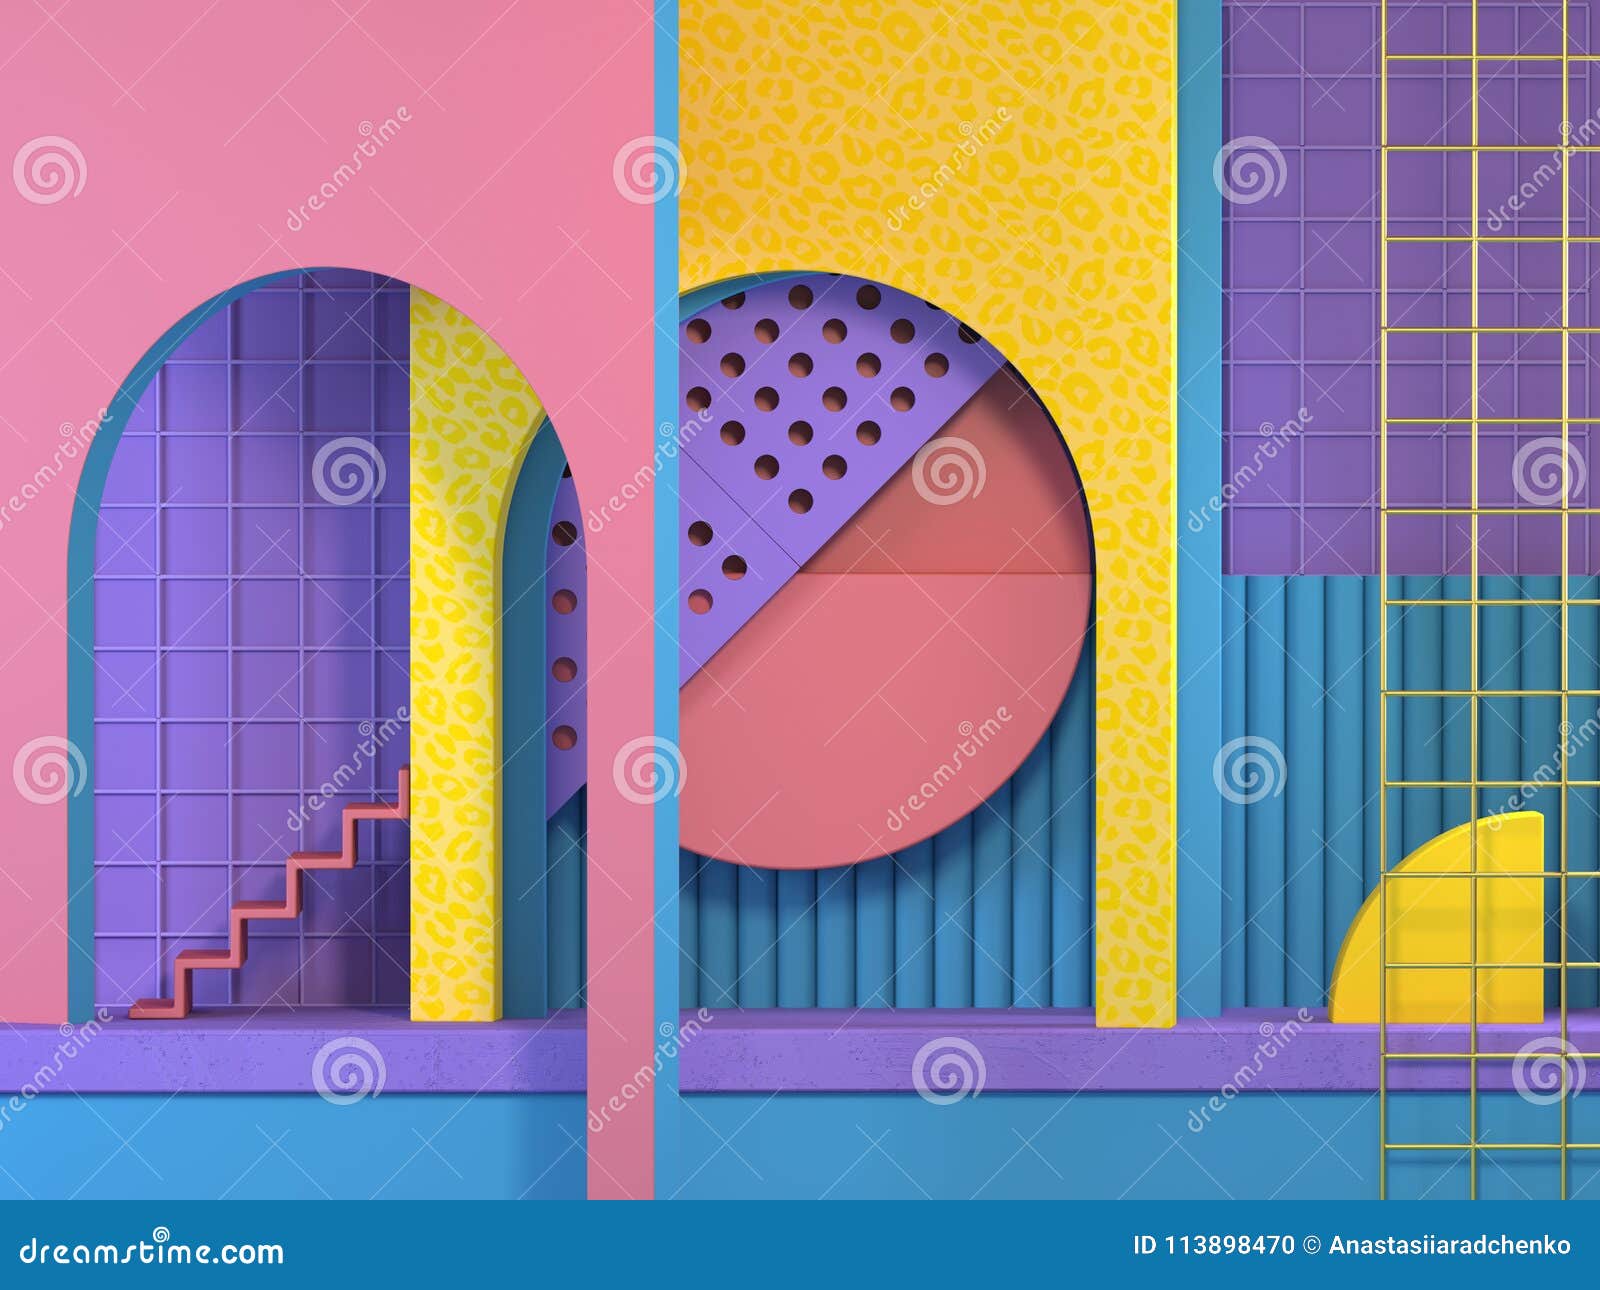 Abstract Interior Space In Memphis Style Stock Illustration